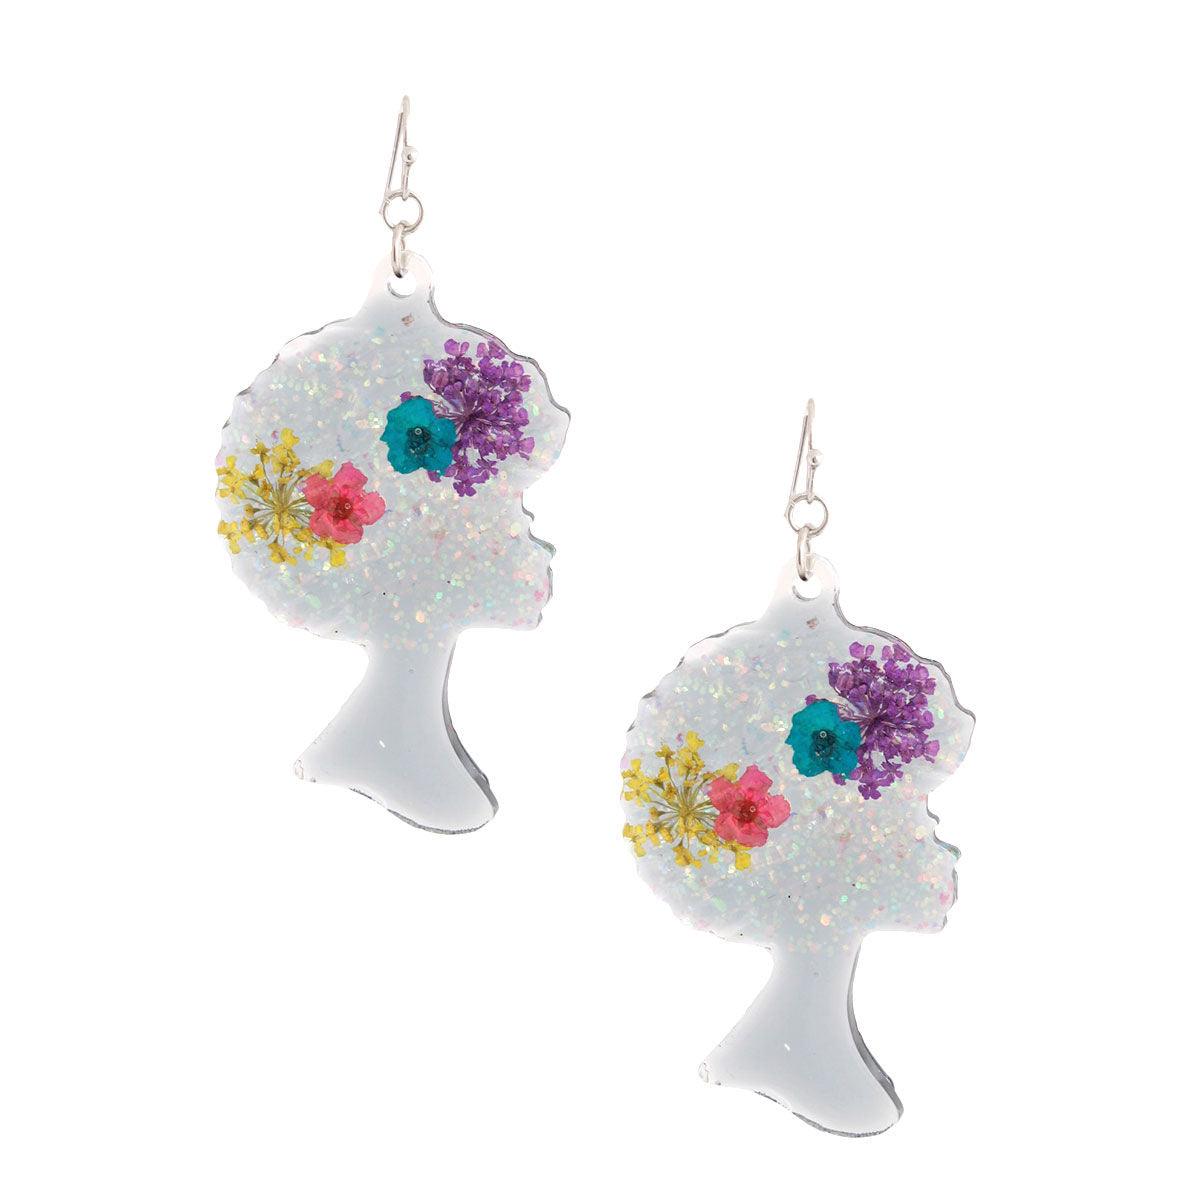 Get the Wow Factor with Black Afro Flower Earrings